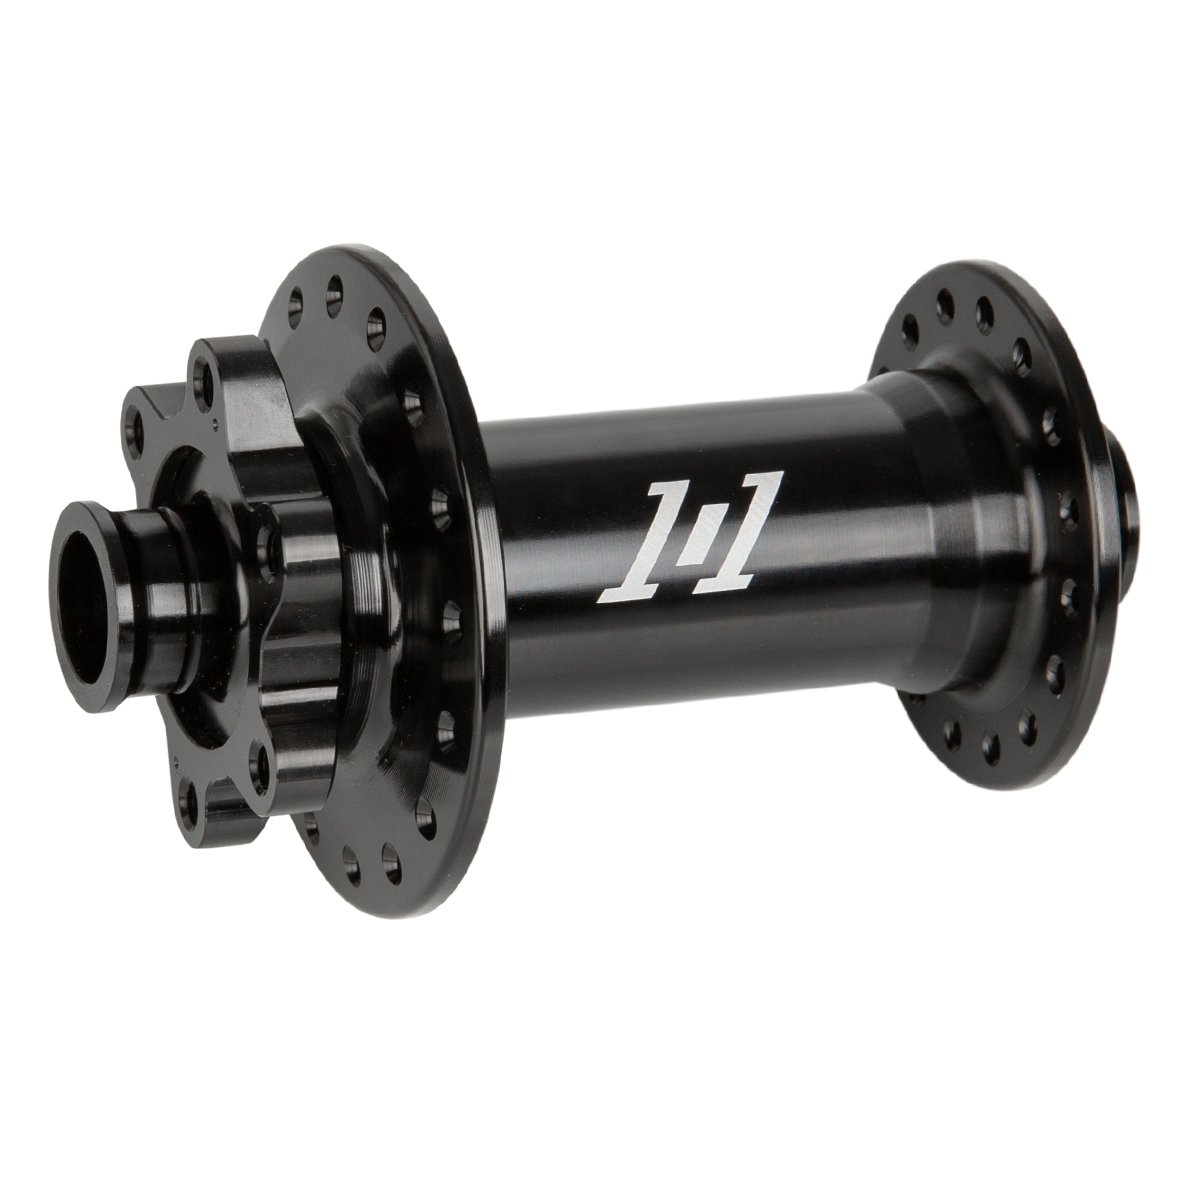 Industry Nine Mozzo Anteriore MTB 1/1 Mountain Classic Boost 110 x 15 mm (Boost), IS 6-Bolt, Black